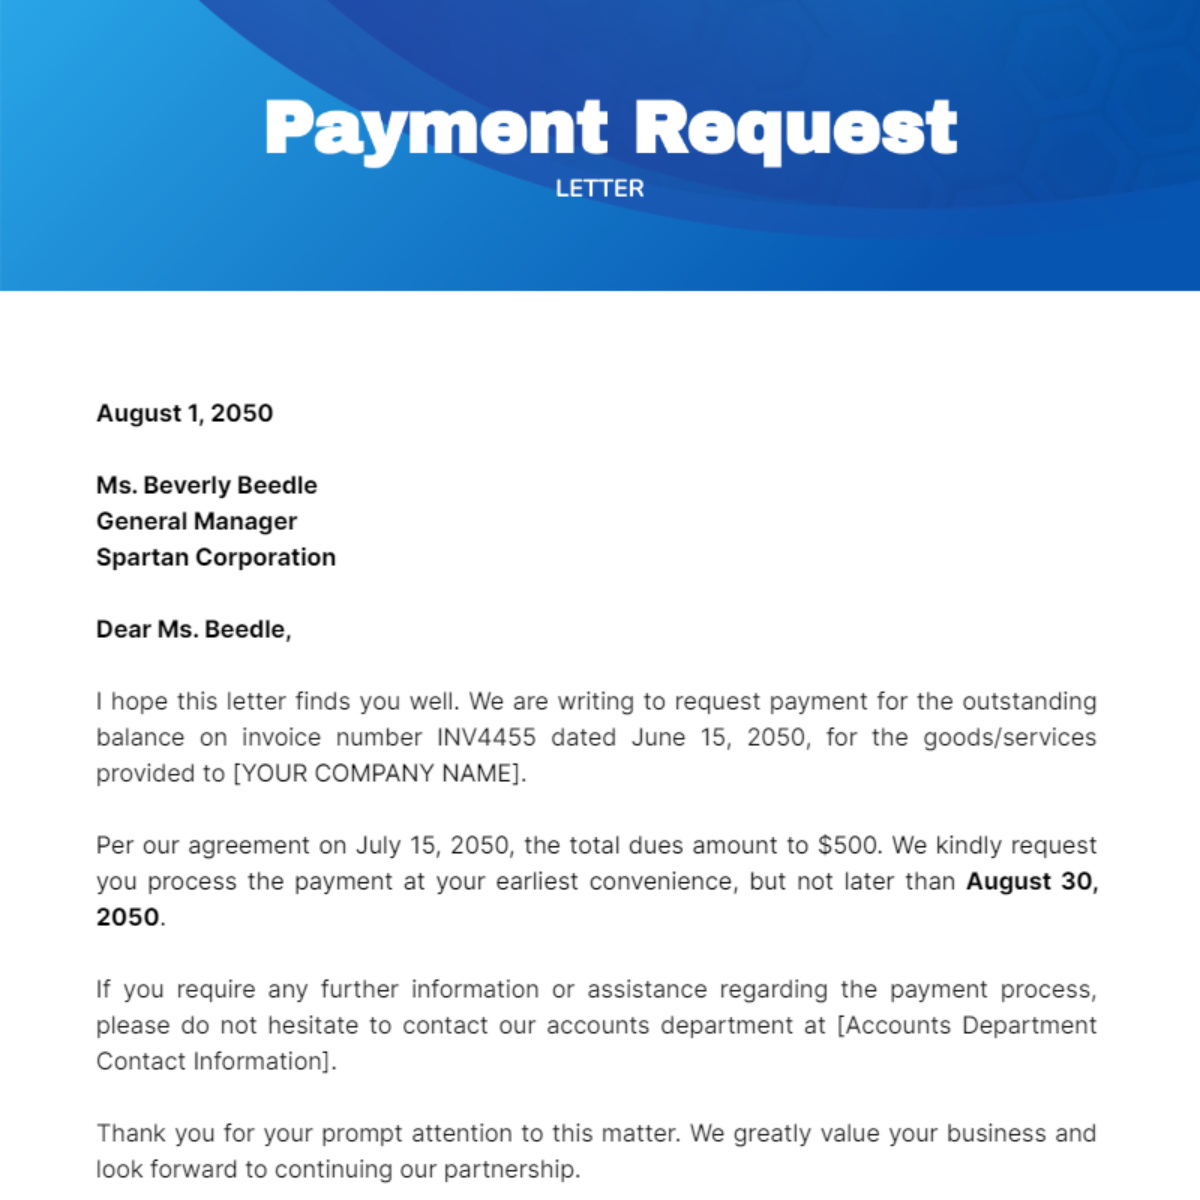 Payment Request Letter Template